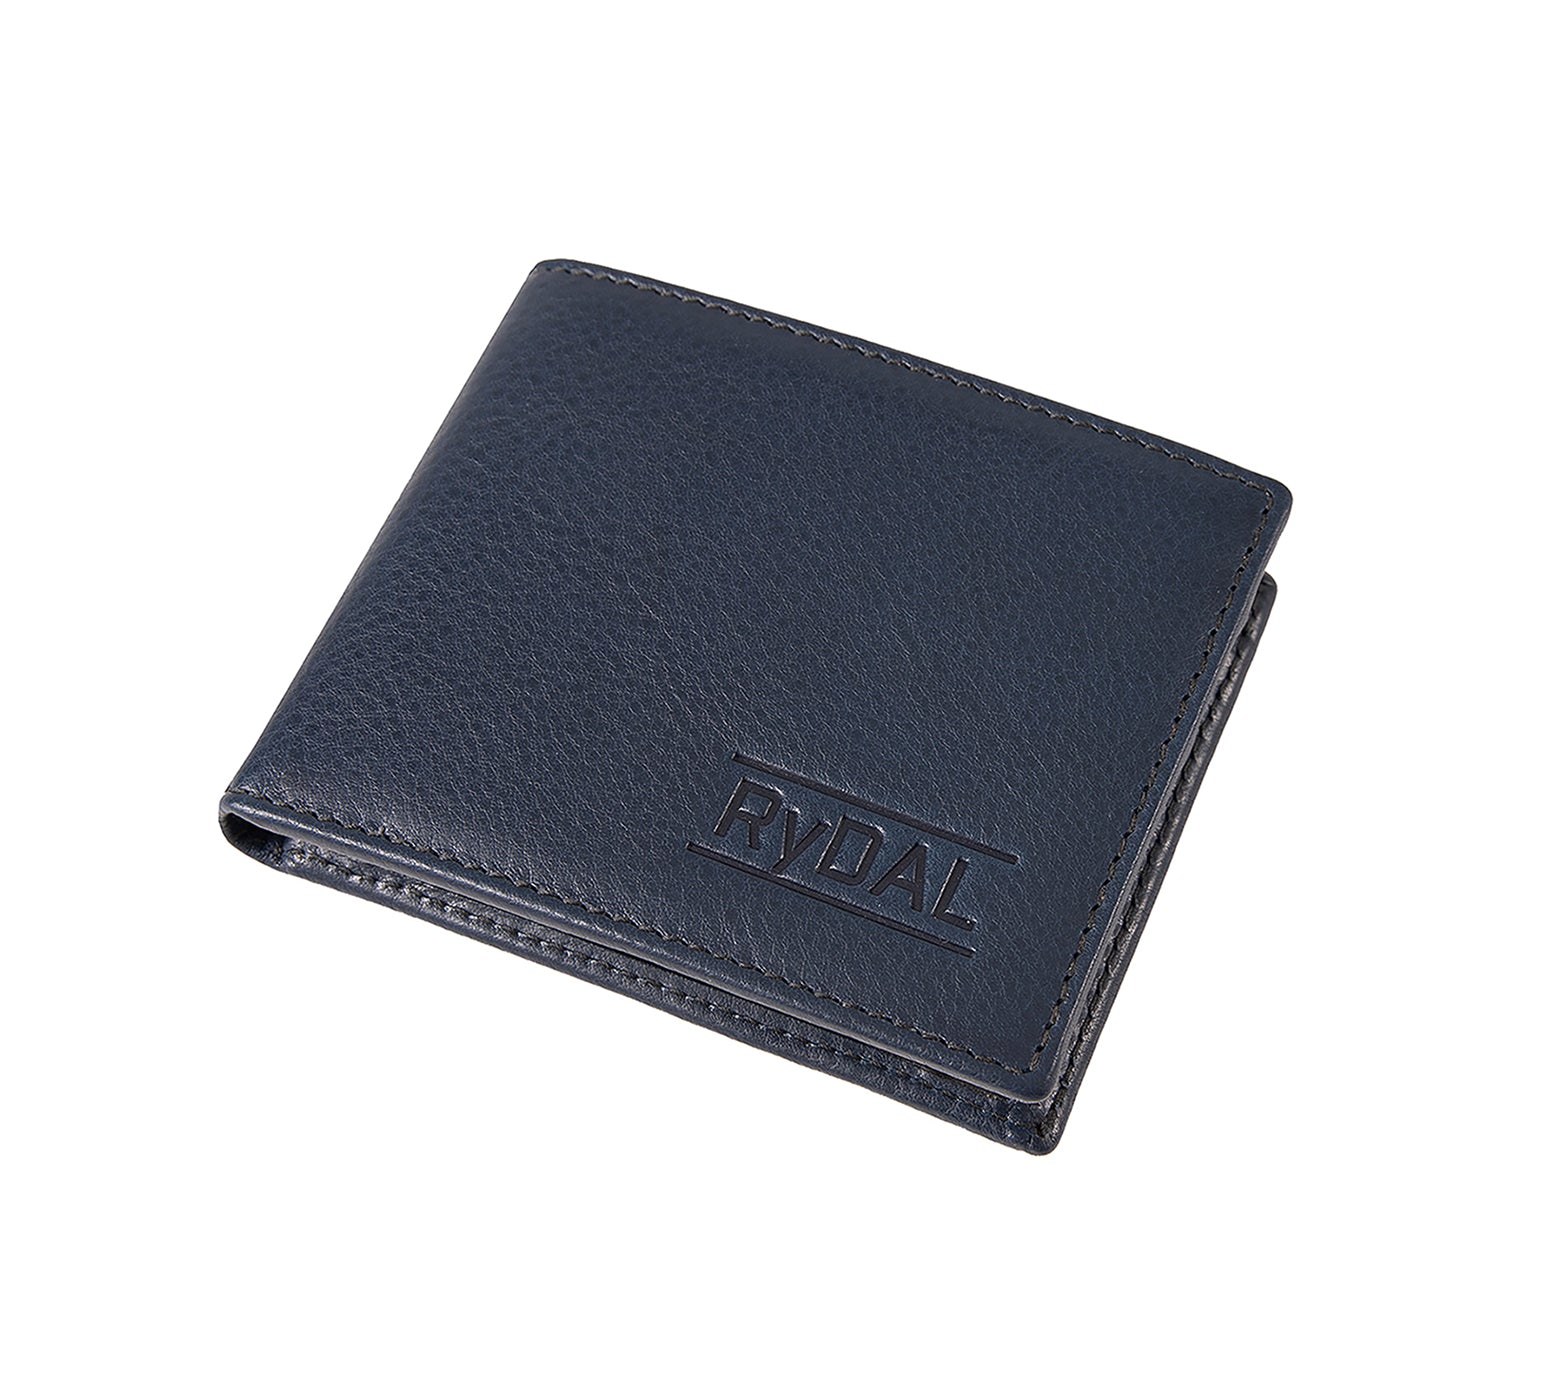 Mens Leather Wallet with Coin Pocket from Rydal in 'Royal Blue/Black' showing wallet closed.